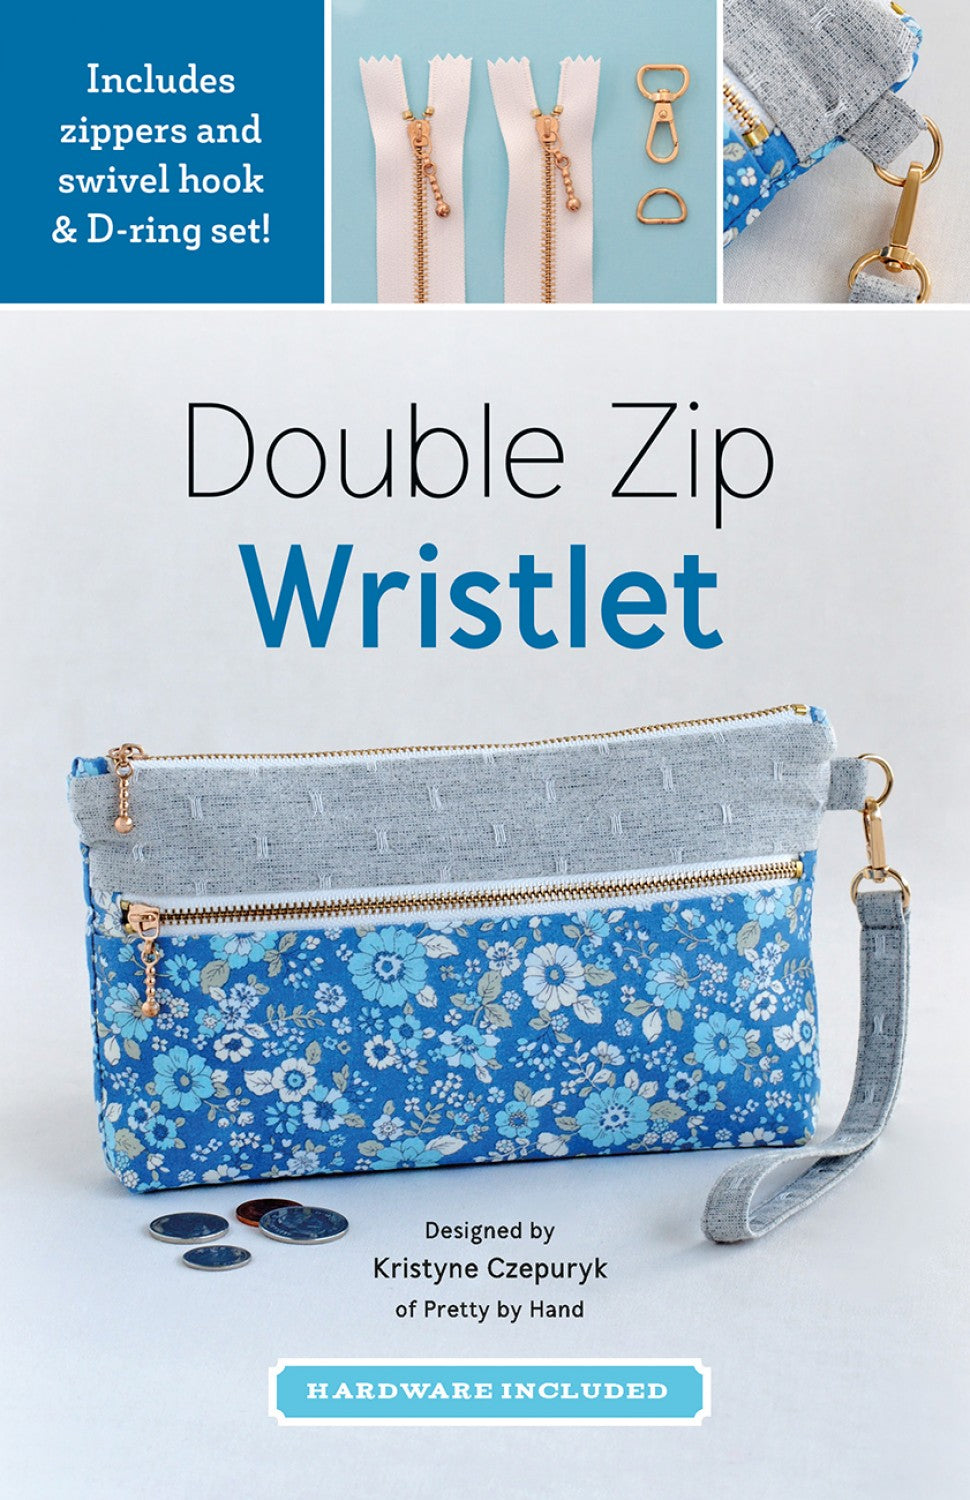 Double Zip Wristlet Pattern Including Zippers and Hardware